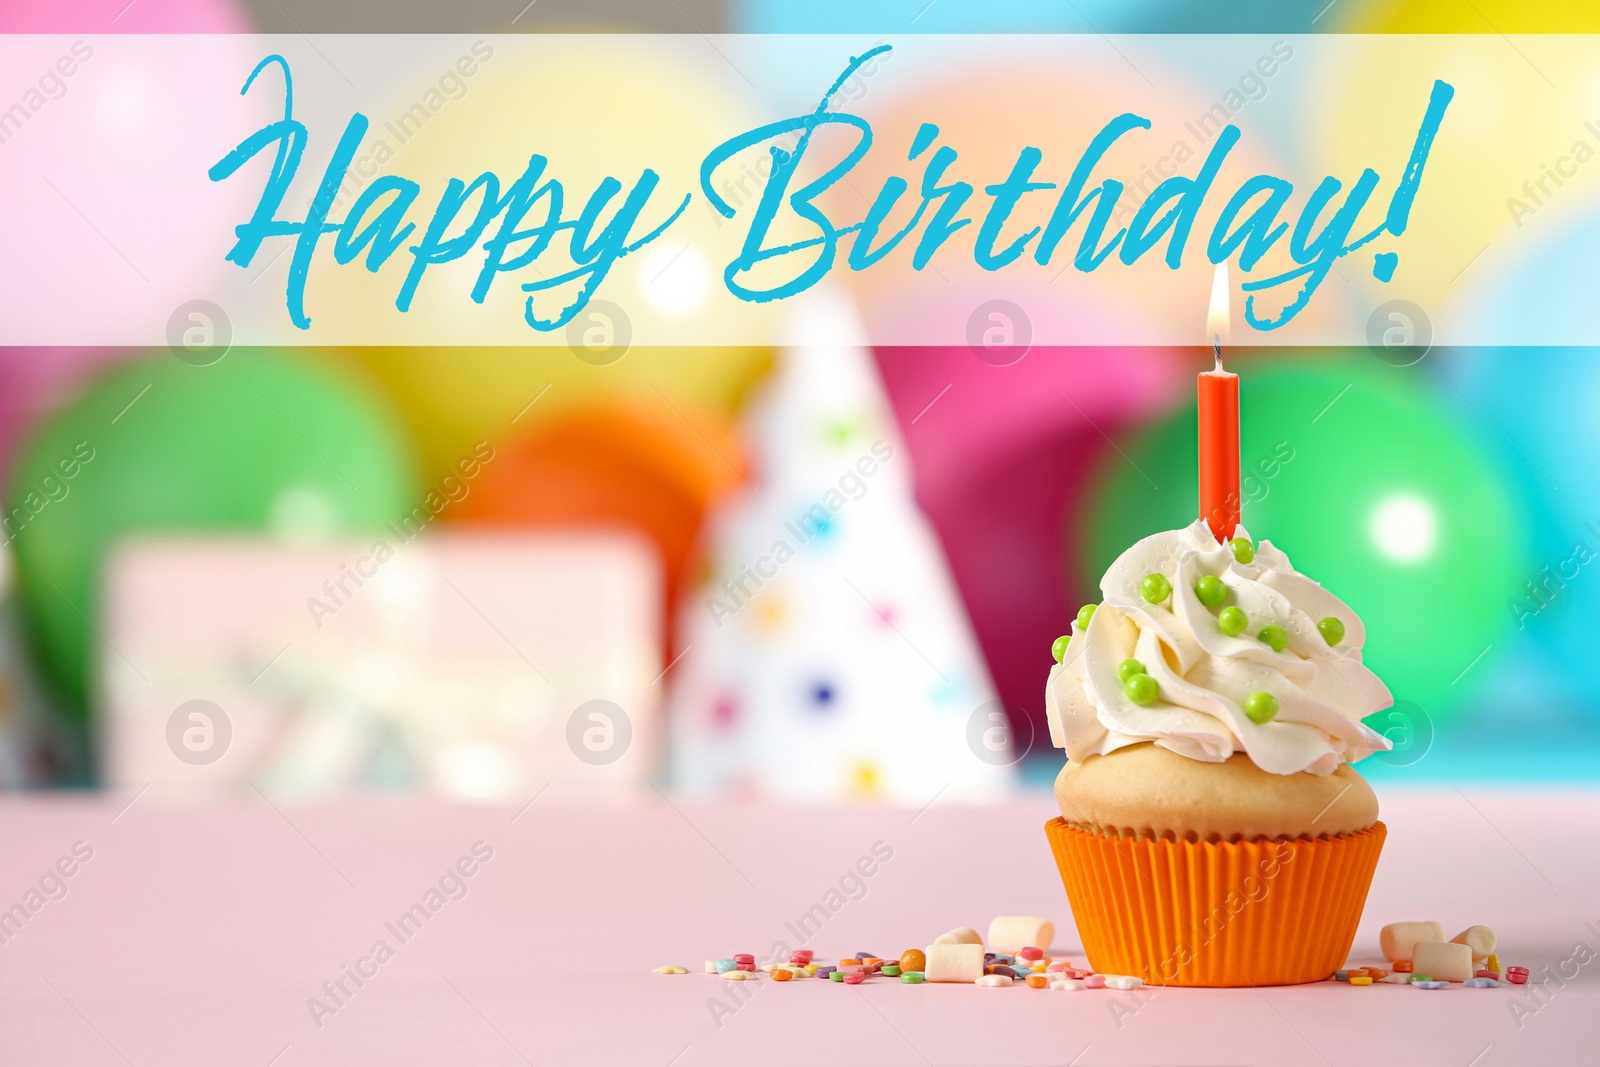 Image of Happy Birthday! Delicious cupcake with candle on pink table against blurred background 